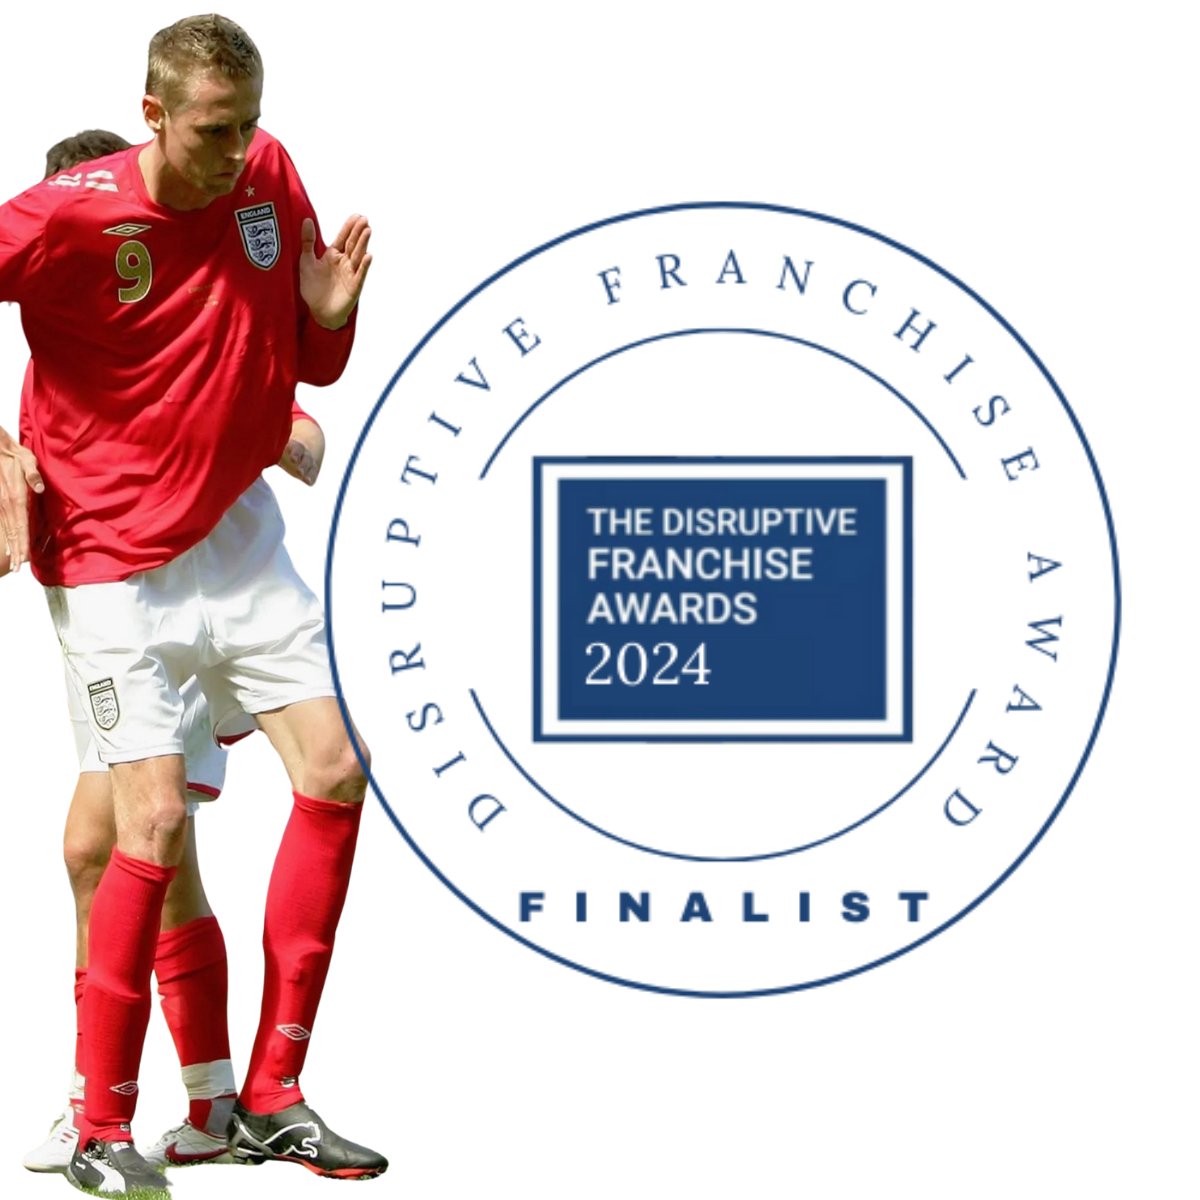 Like Peter Crouch busting out the iconic robot in the summer of 2006, we're feeling pretty disruptive right now 🤖

We're finalists in the Best Online Presence category at this year's Disruptive Franchise Awards 🕺

#petercrouch #franchiseopportunities #franchiseopportunity